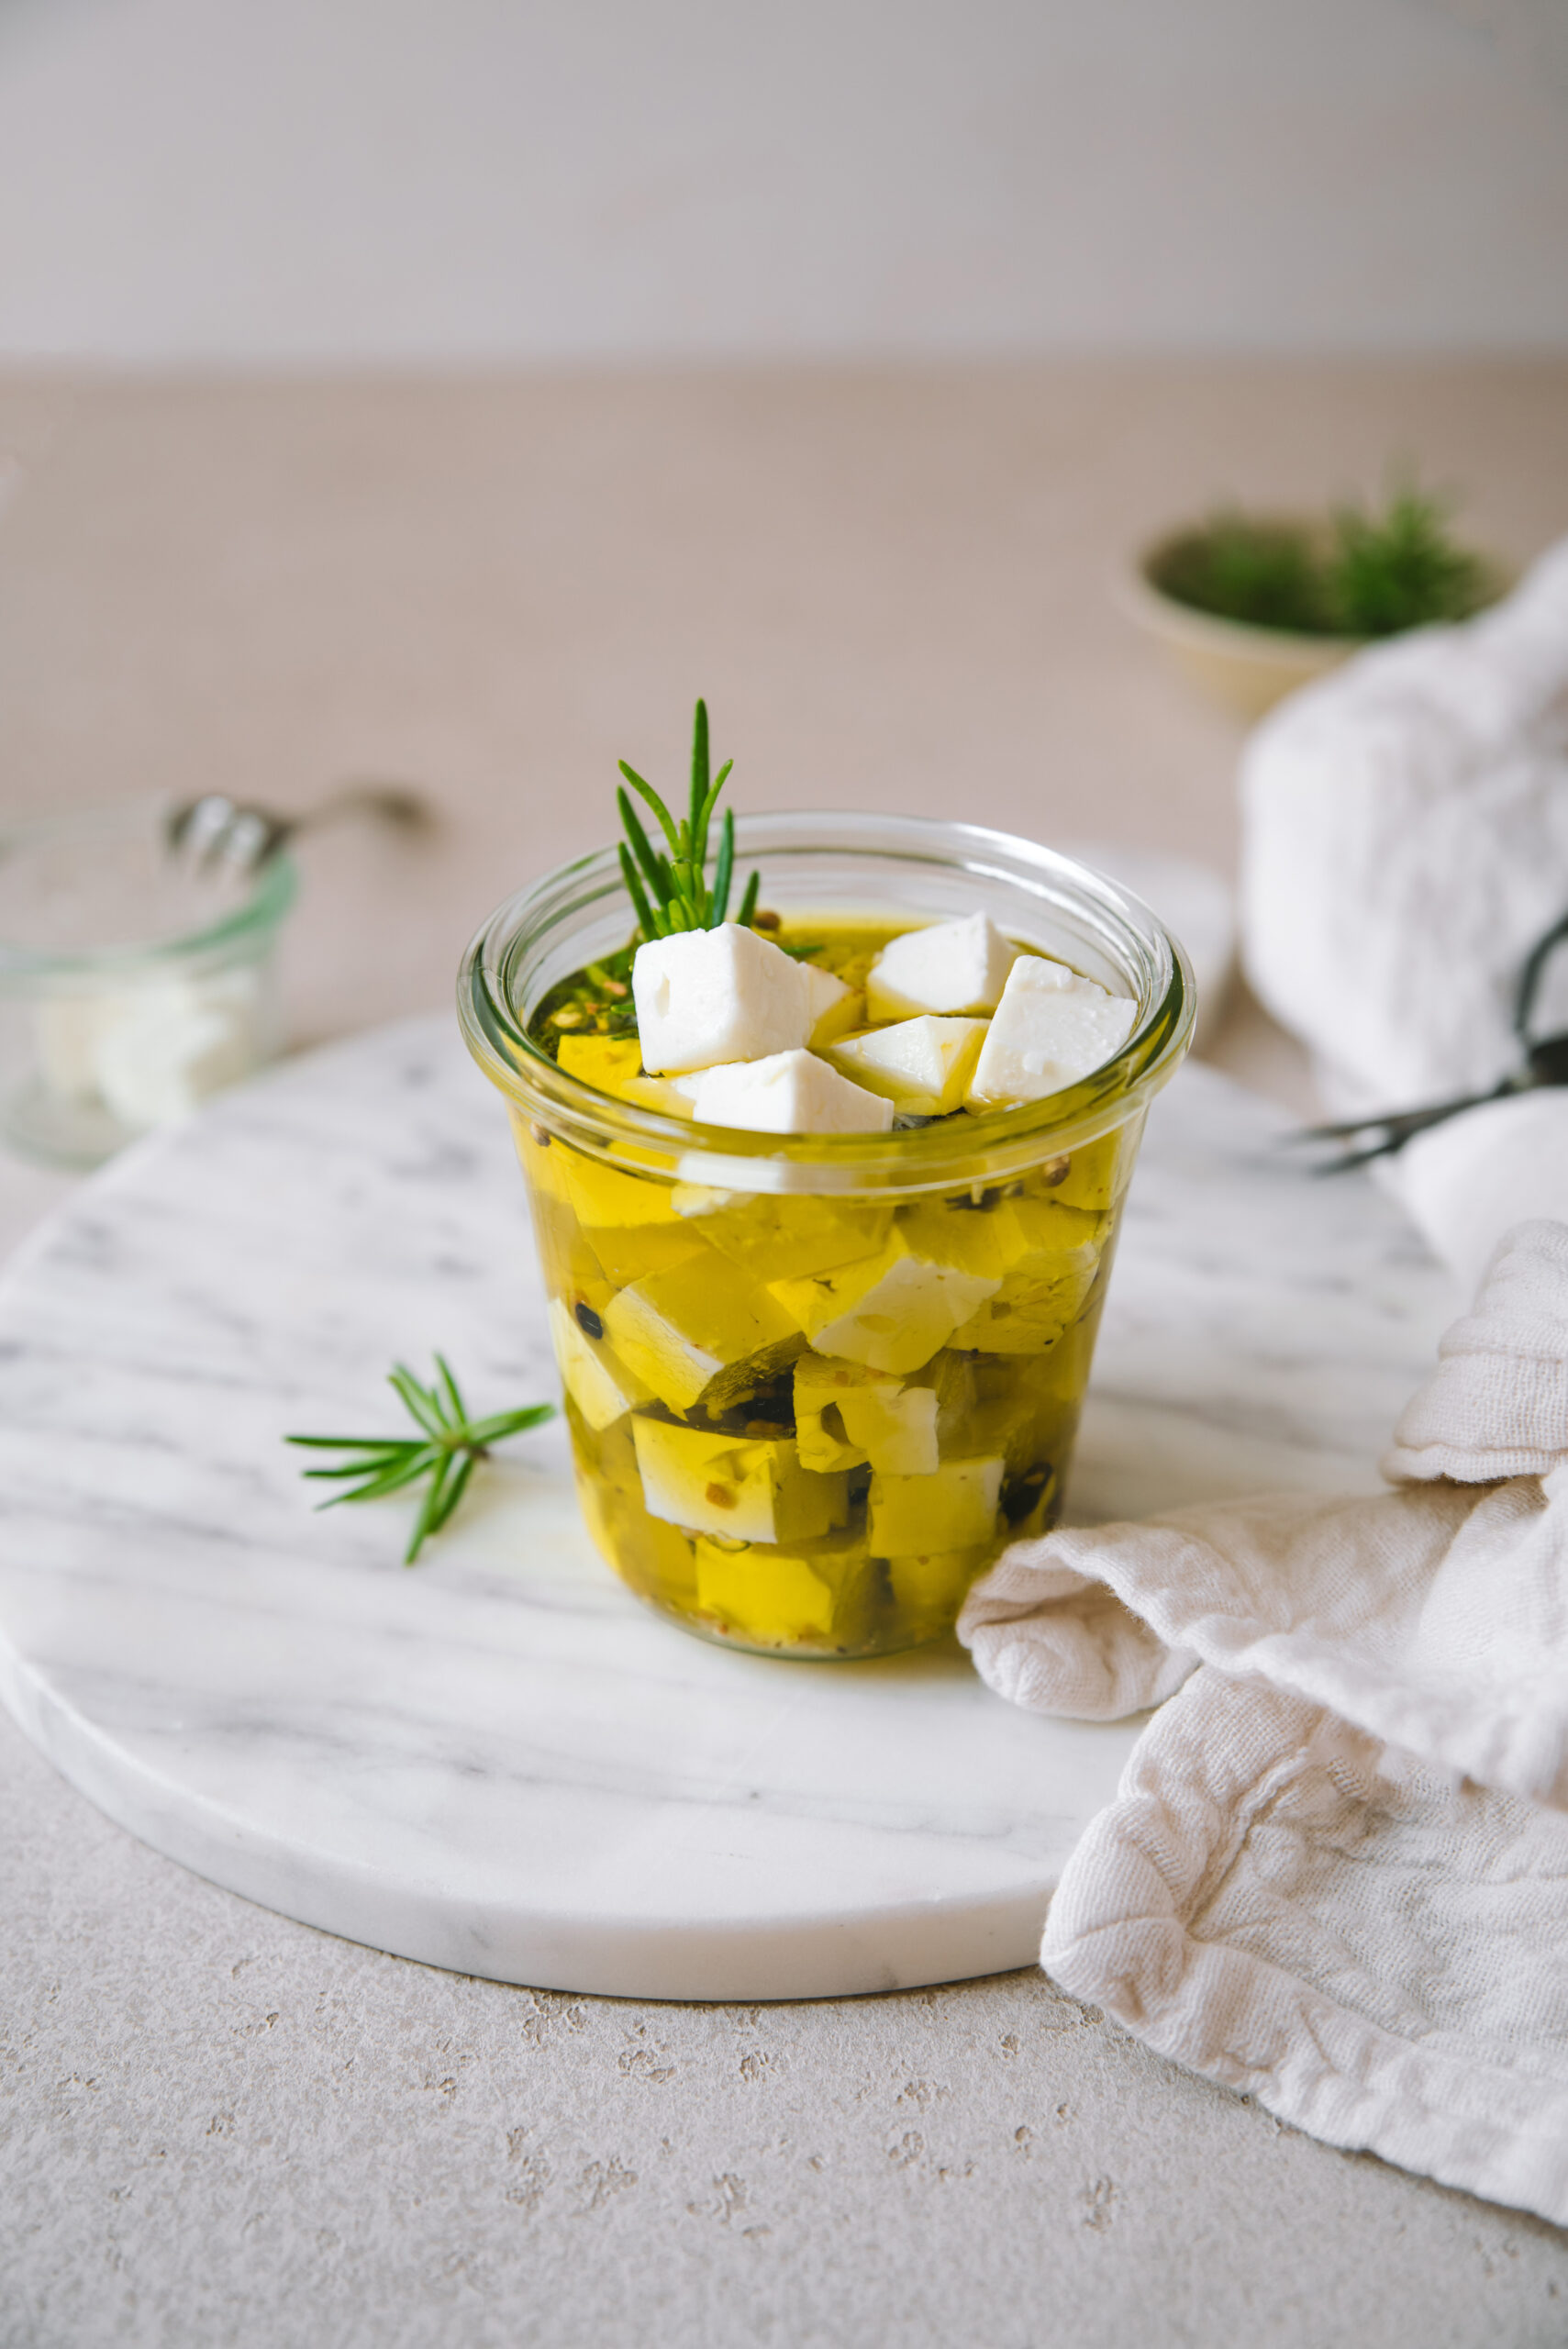 Marinated Feta Cheese in Olive Oil